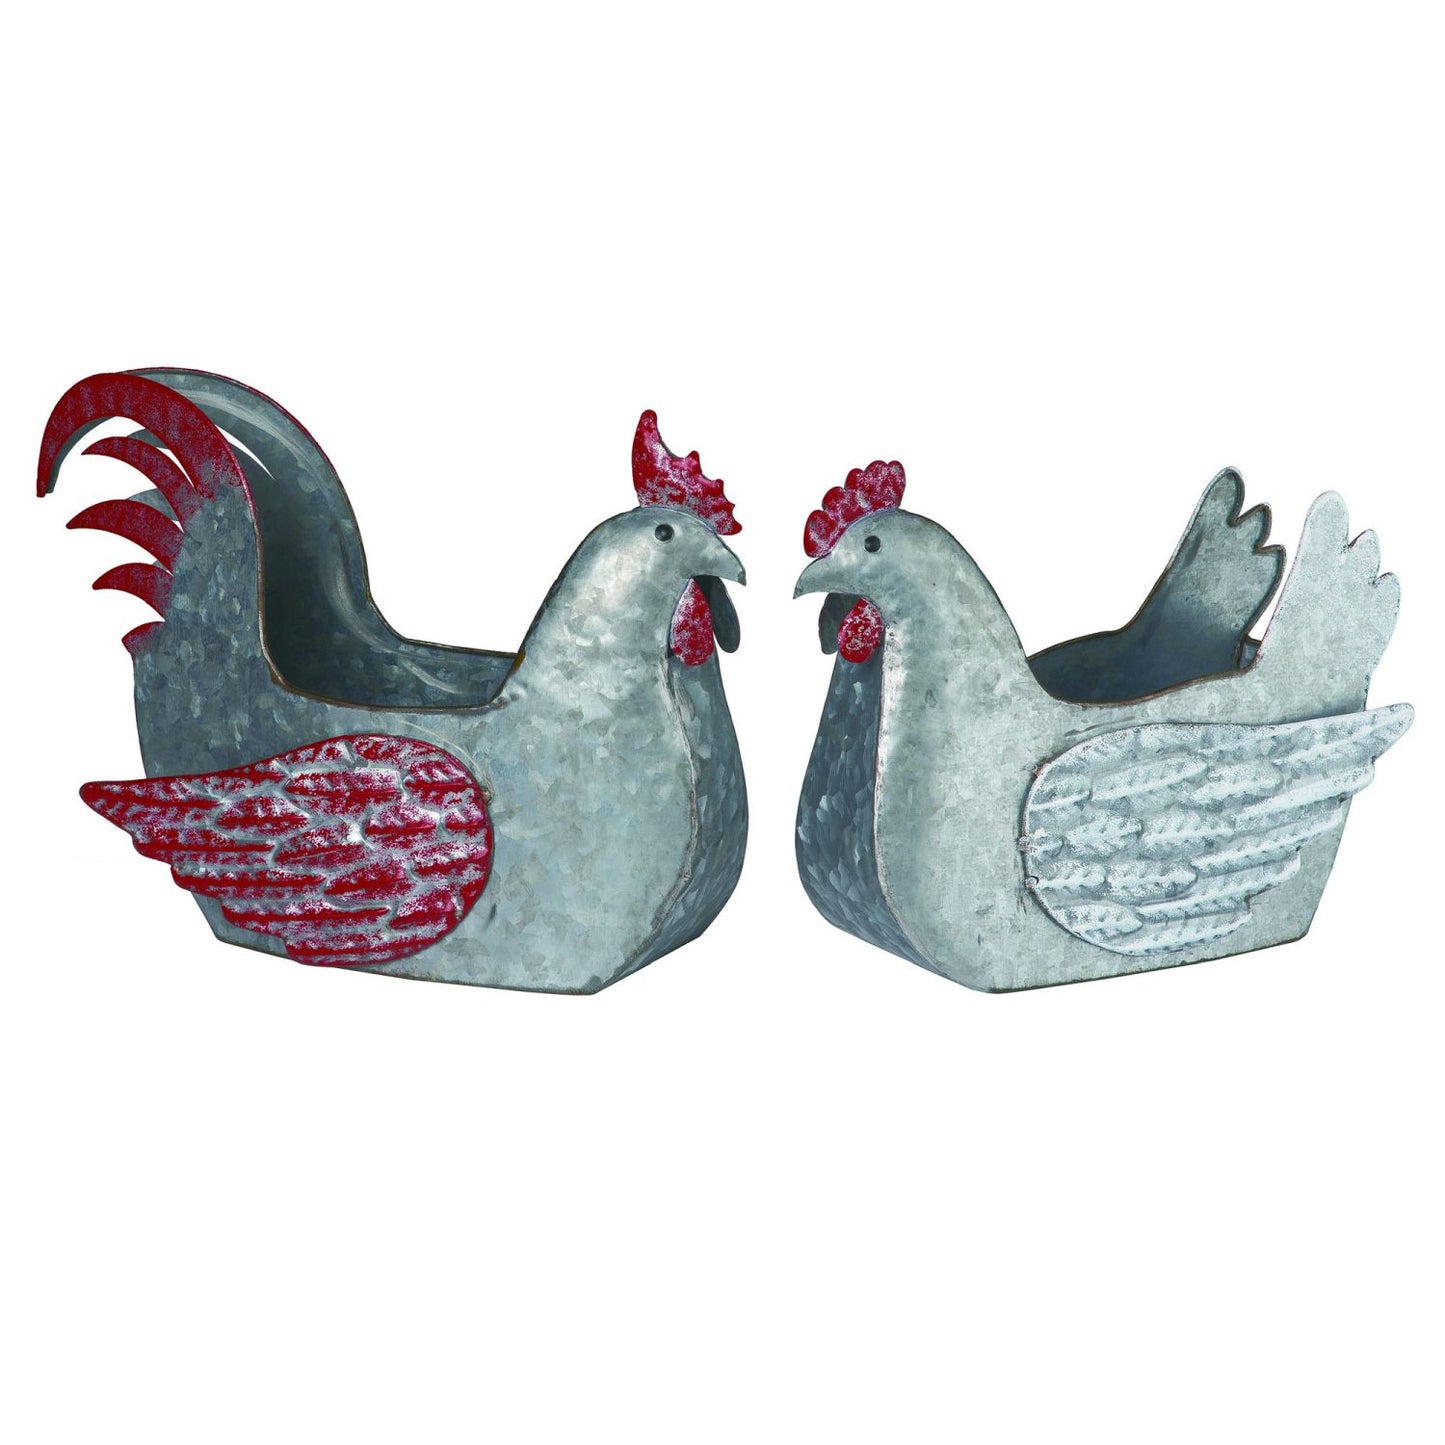 Transpac Metal Rooster & Hen Container, Set Of 2, Assortment